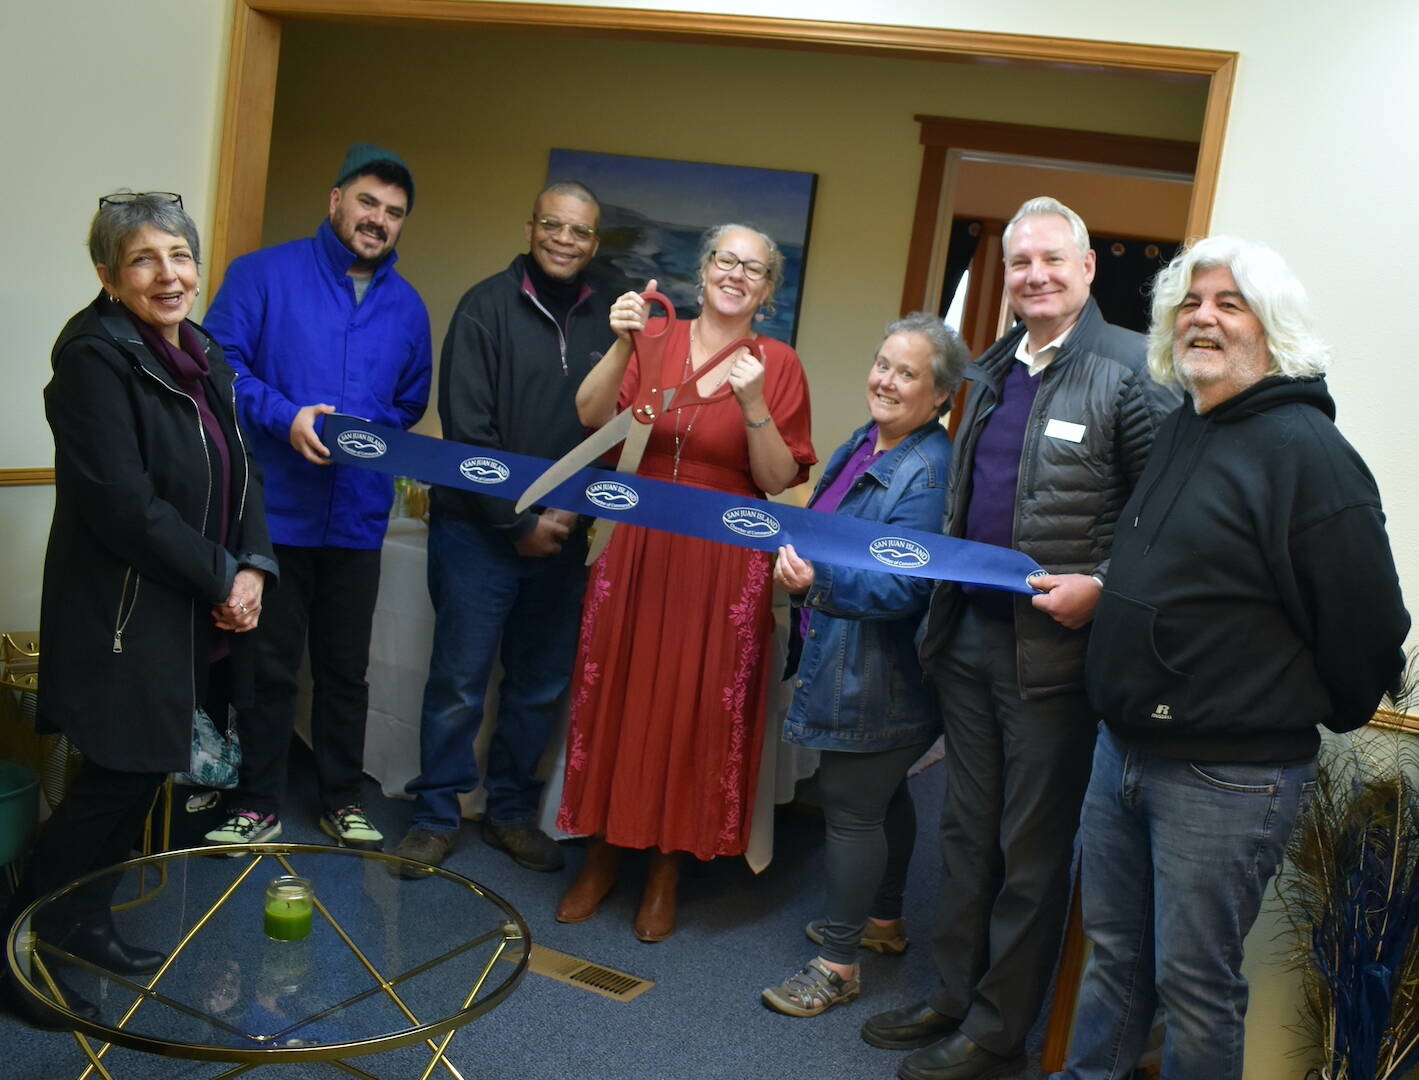 Kelley Balcomb-Bartok / Staff photo
Helen Halverson, owner of LightWorks Studios (holding scissors) is joined by (l-r) San Juan Island Chamber of Commerce Executive Director Becky Day, Roberto Moya, Friday Harbor Mayor Ray Jackson, Kris Brown, Scott Sluis, and Carl Bruno at a ribbon cutting event February 6 celebrating the opening of LightWorks Studios.